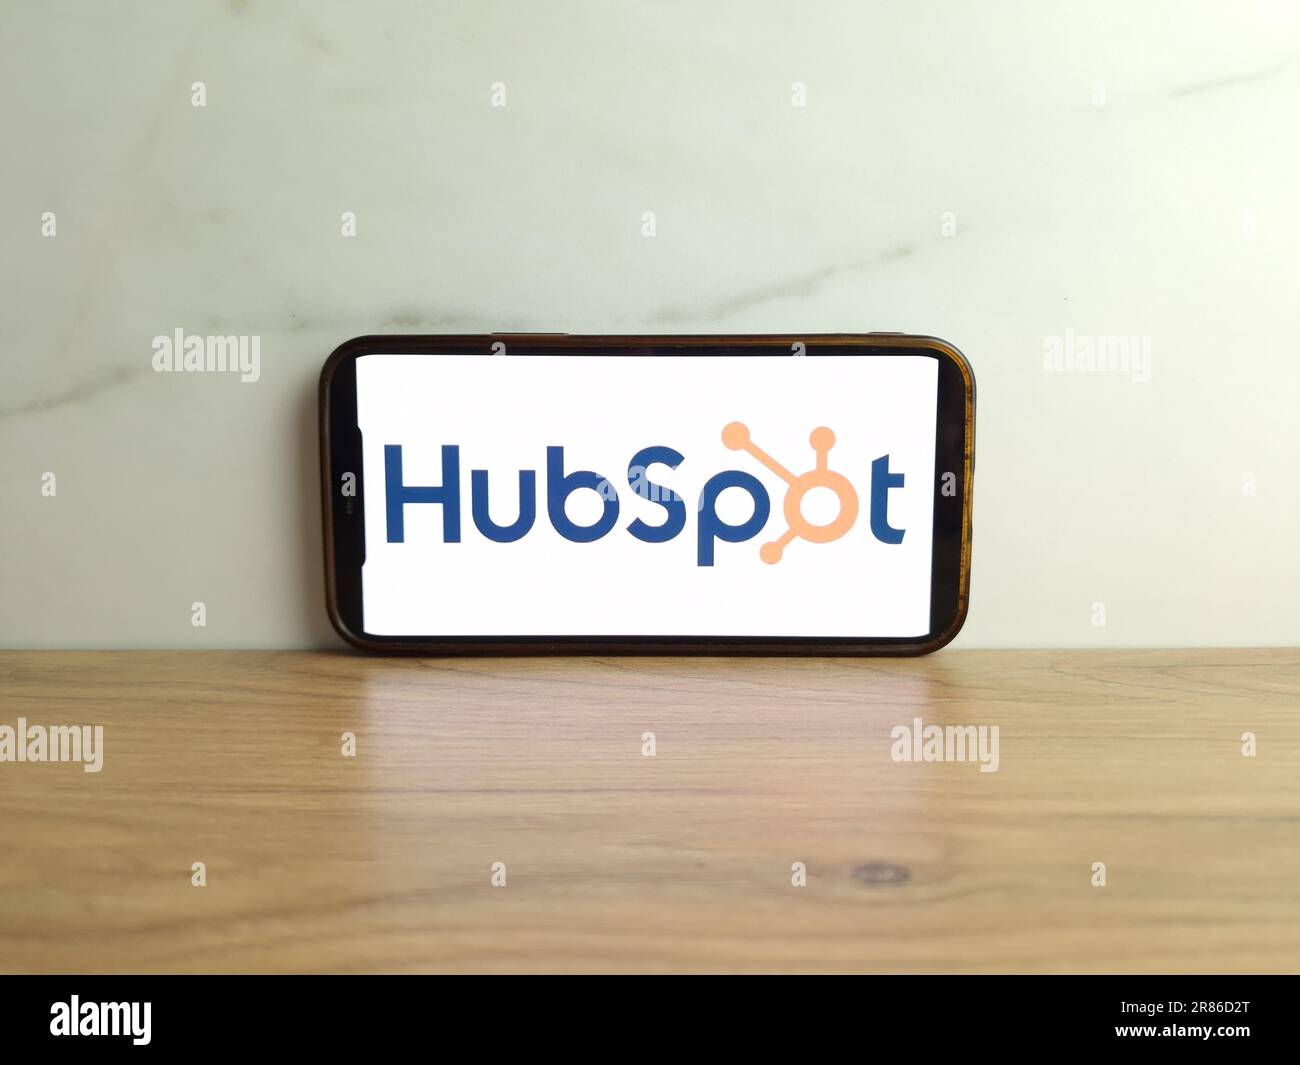 Konskie, Poland - June 17, 2023: HubSpot software company logo displayed on mobile phone screen Stock Photo